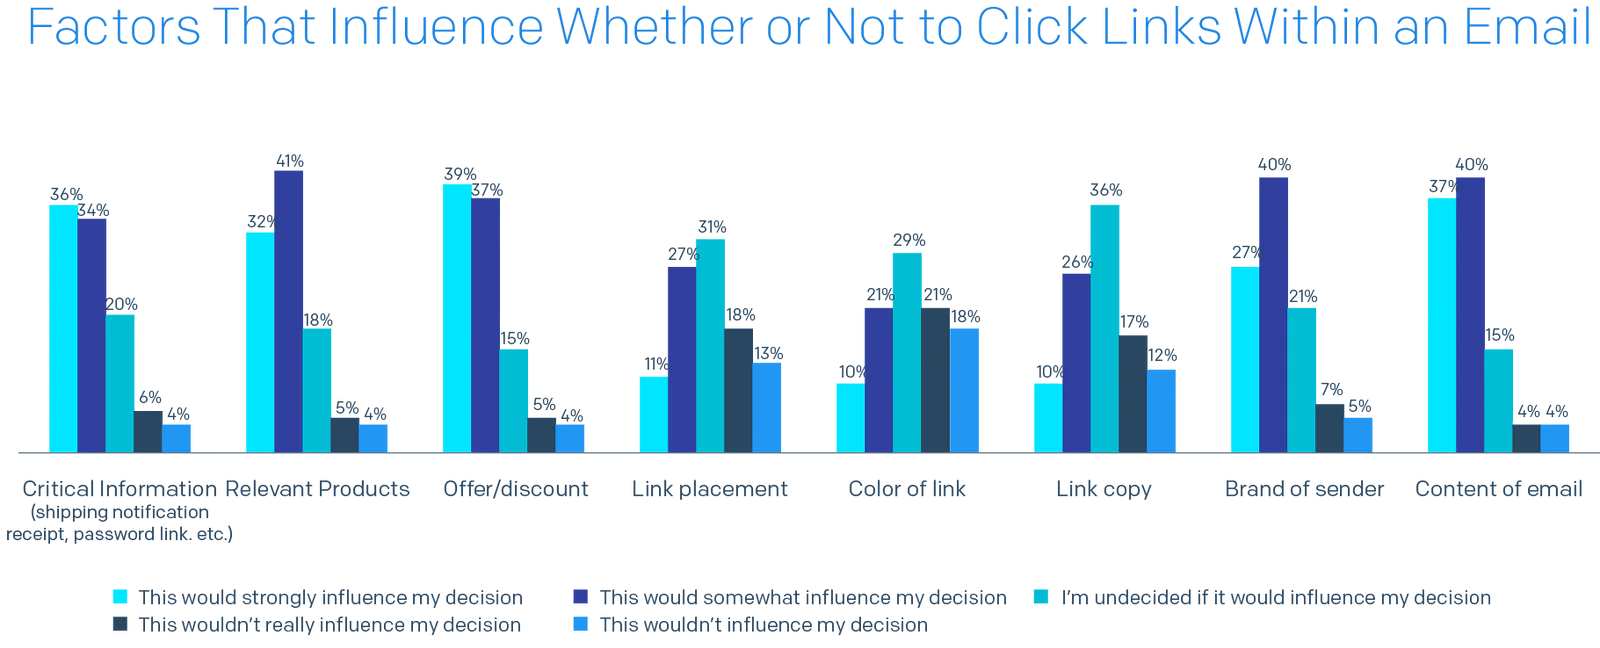 Bar chart of Factors That Influence Whether or Not to Click Links Within an Email